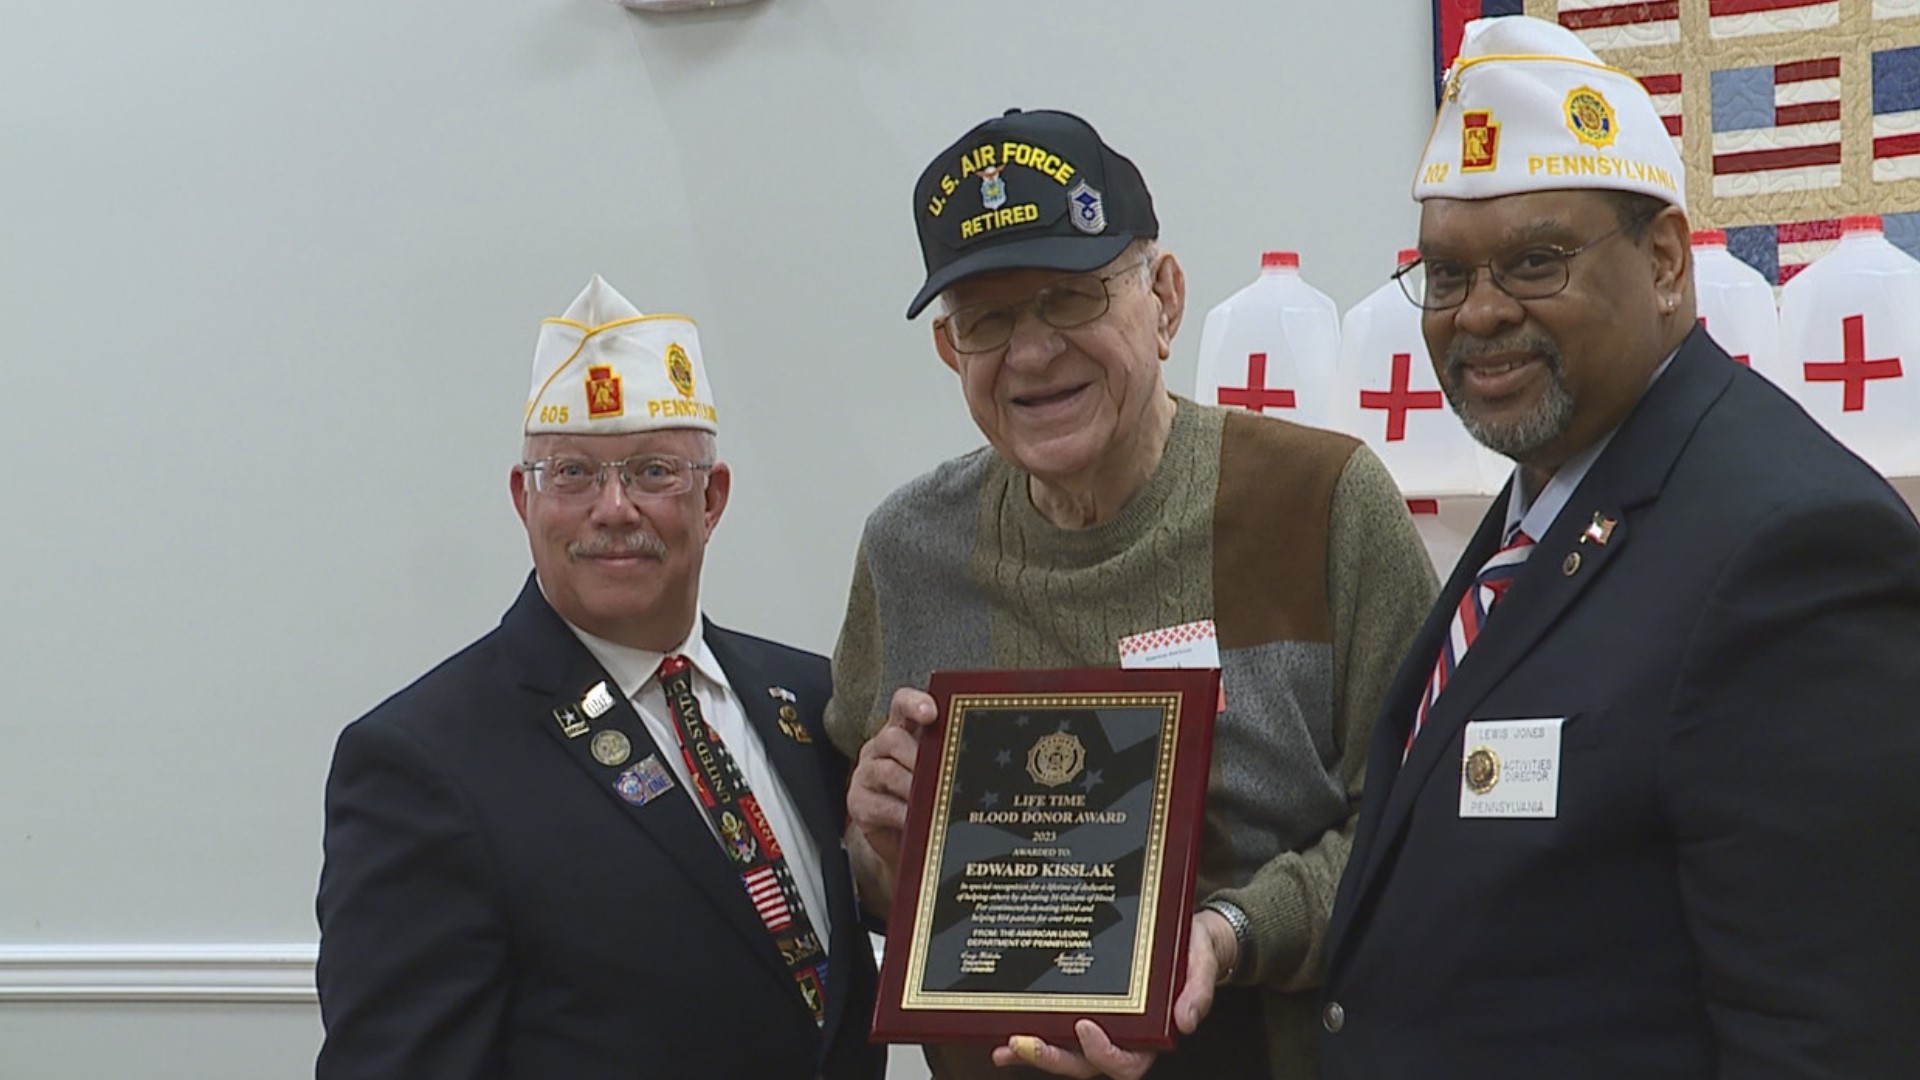 Ed Kisslak was honored after donating more than thirty-six gallons of blood over the past several decades.